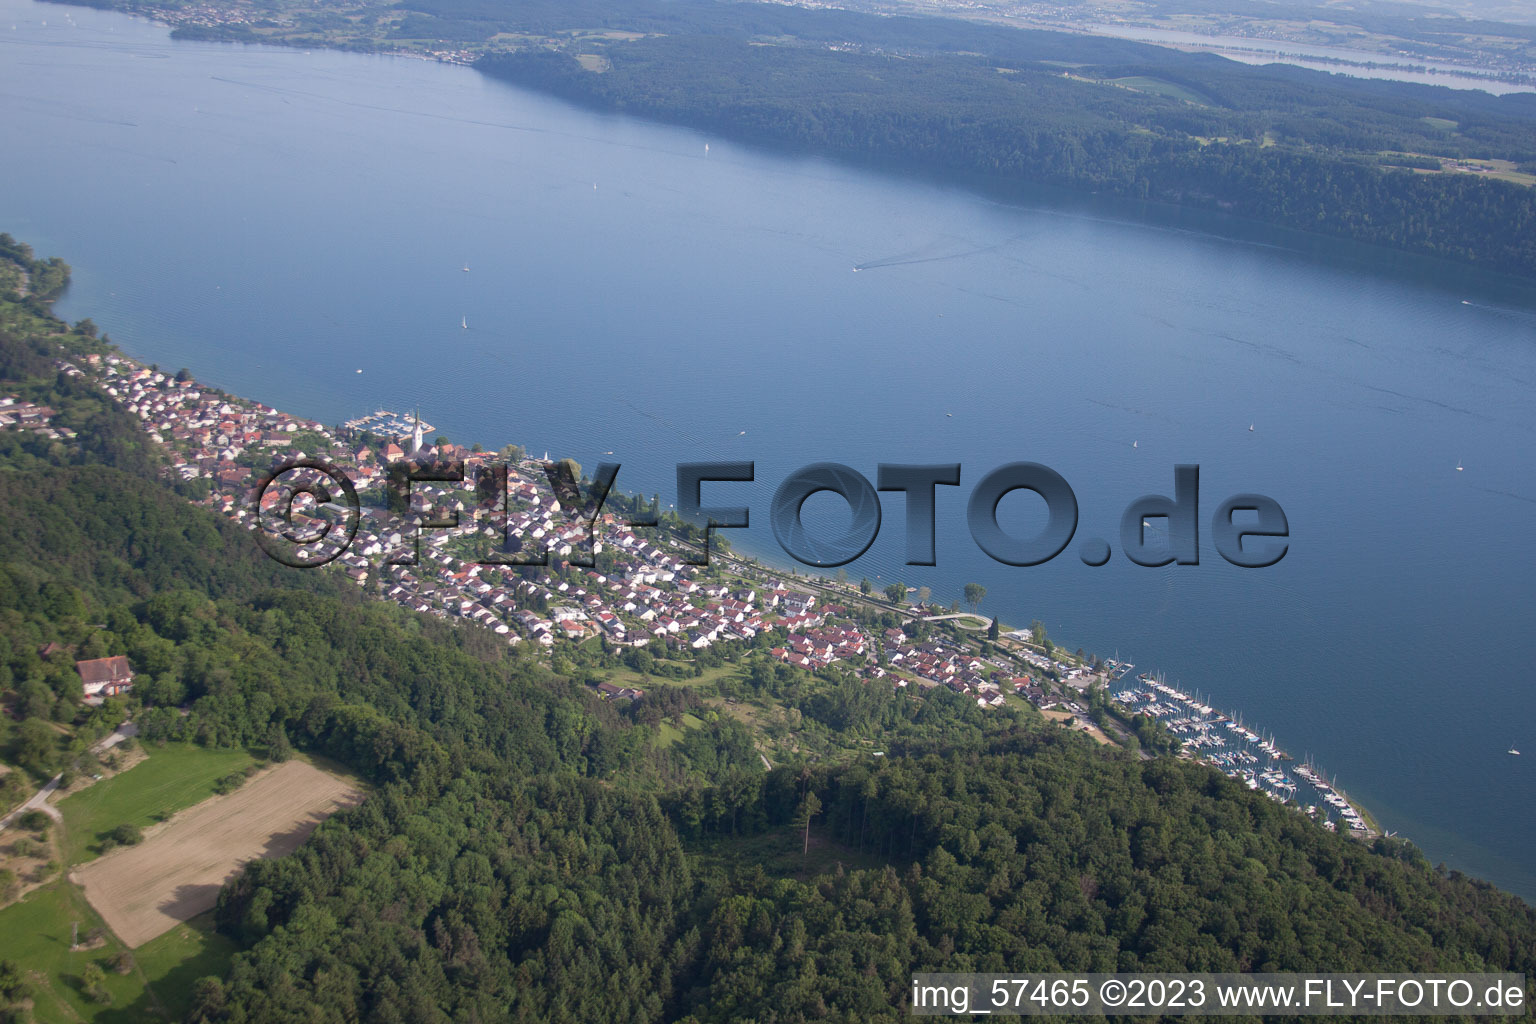 Sipplingen in the state Baden-Wuerttemberg, Germany seen from above